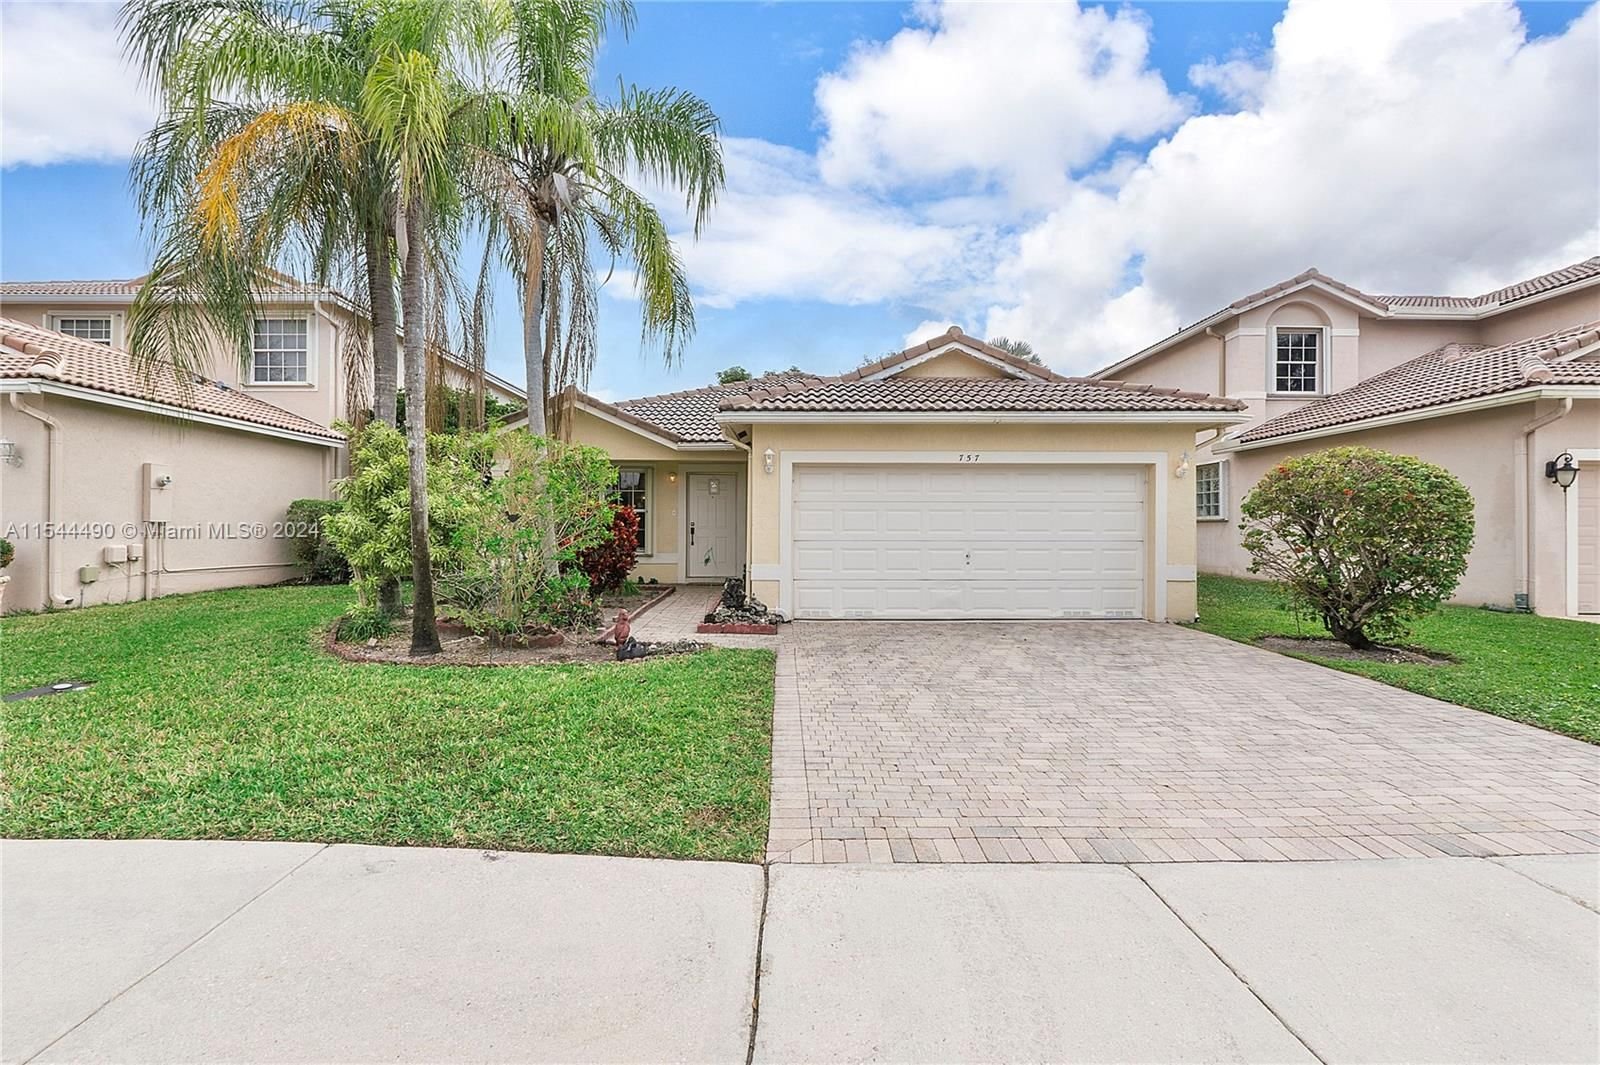 Real estate property located at 757 120th Ave, Broward County, NASHER PLAT, Pembroke Pines, FL